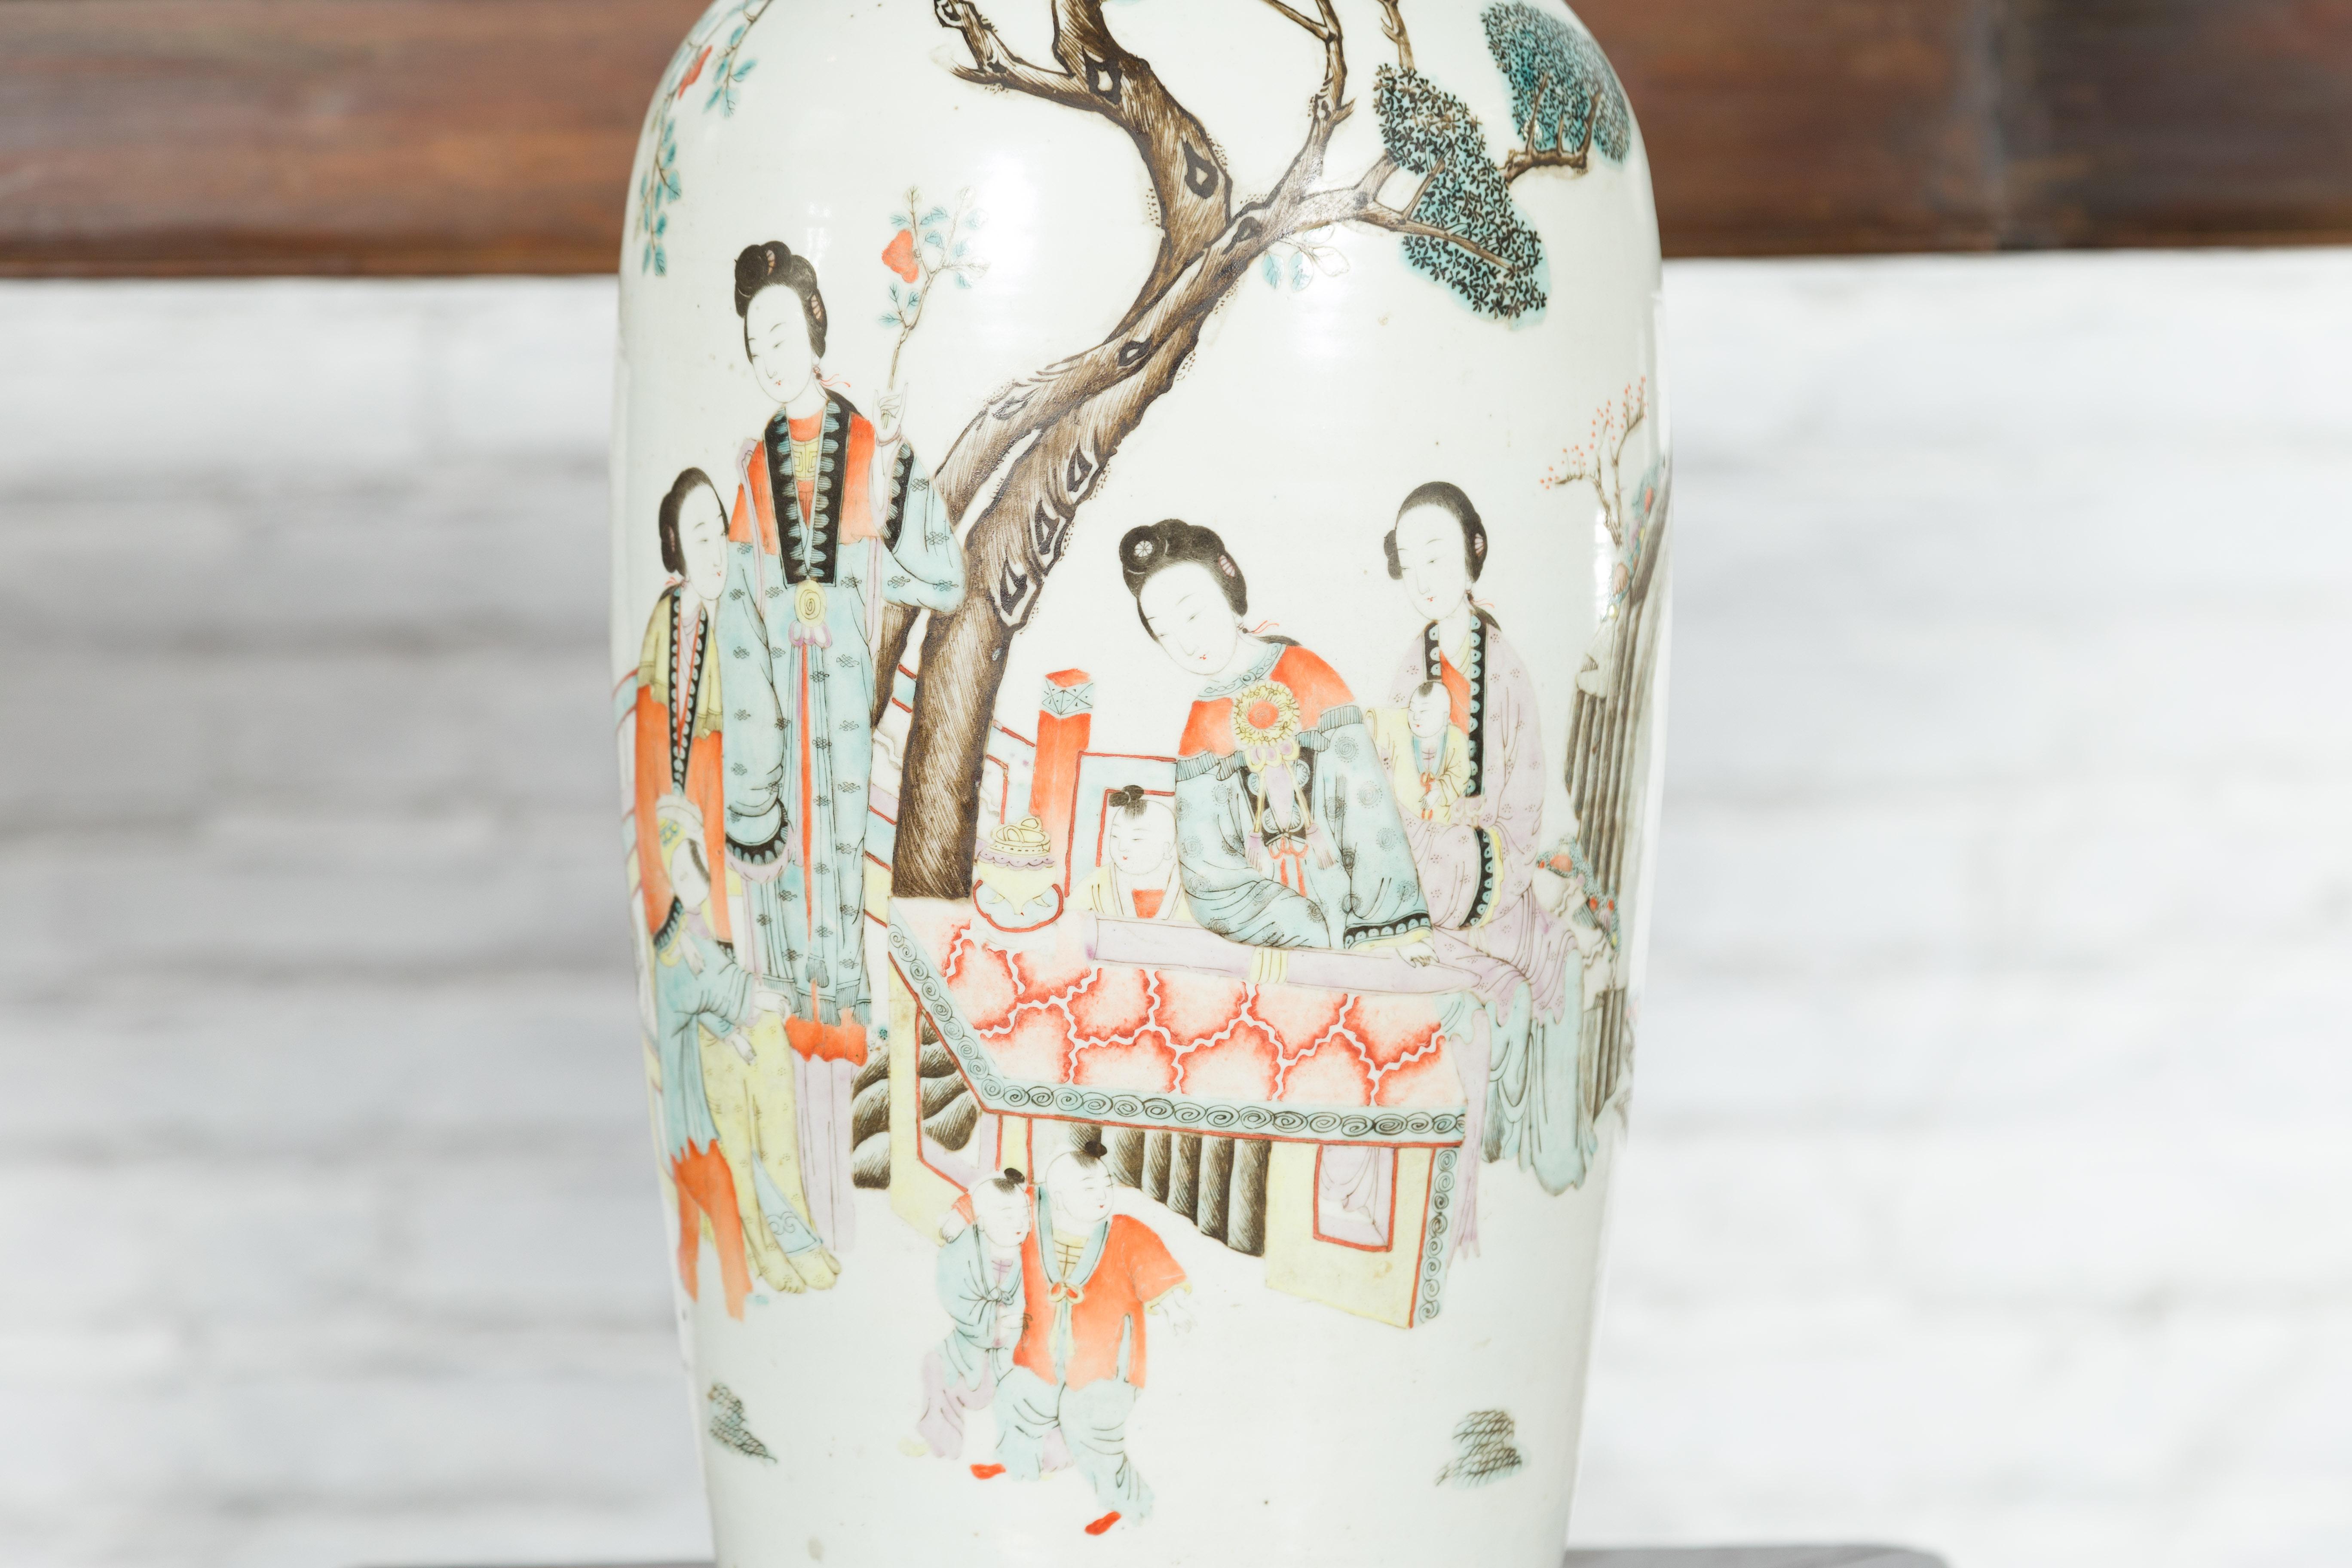 Chinese Qing Porcelain Vase with Hand-Painted Figures and Calligraphy Motifs For Sale 2